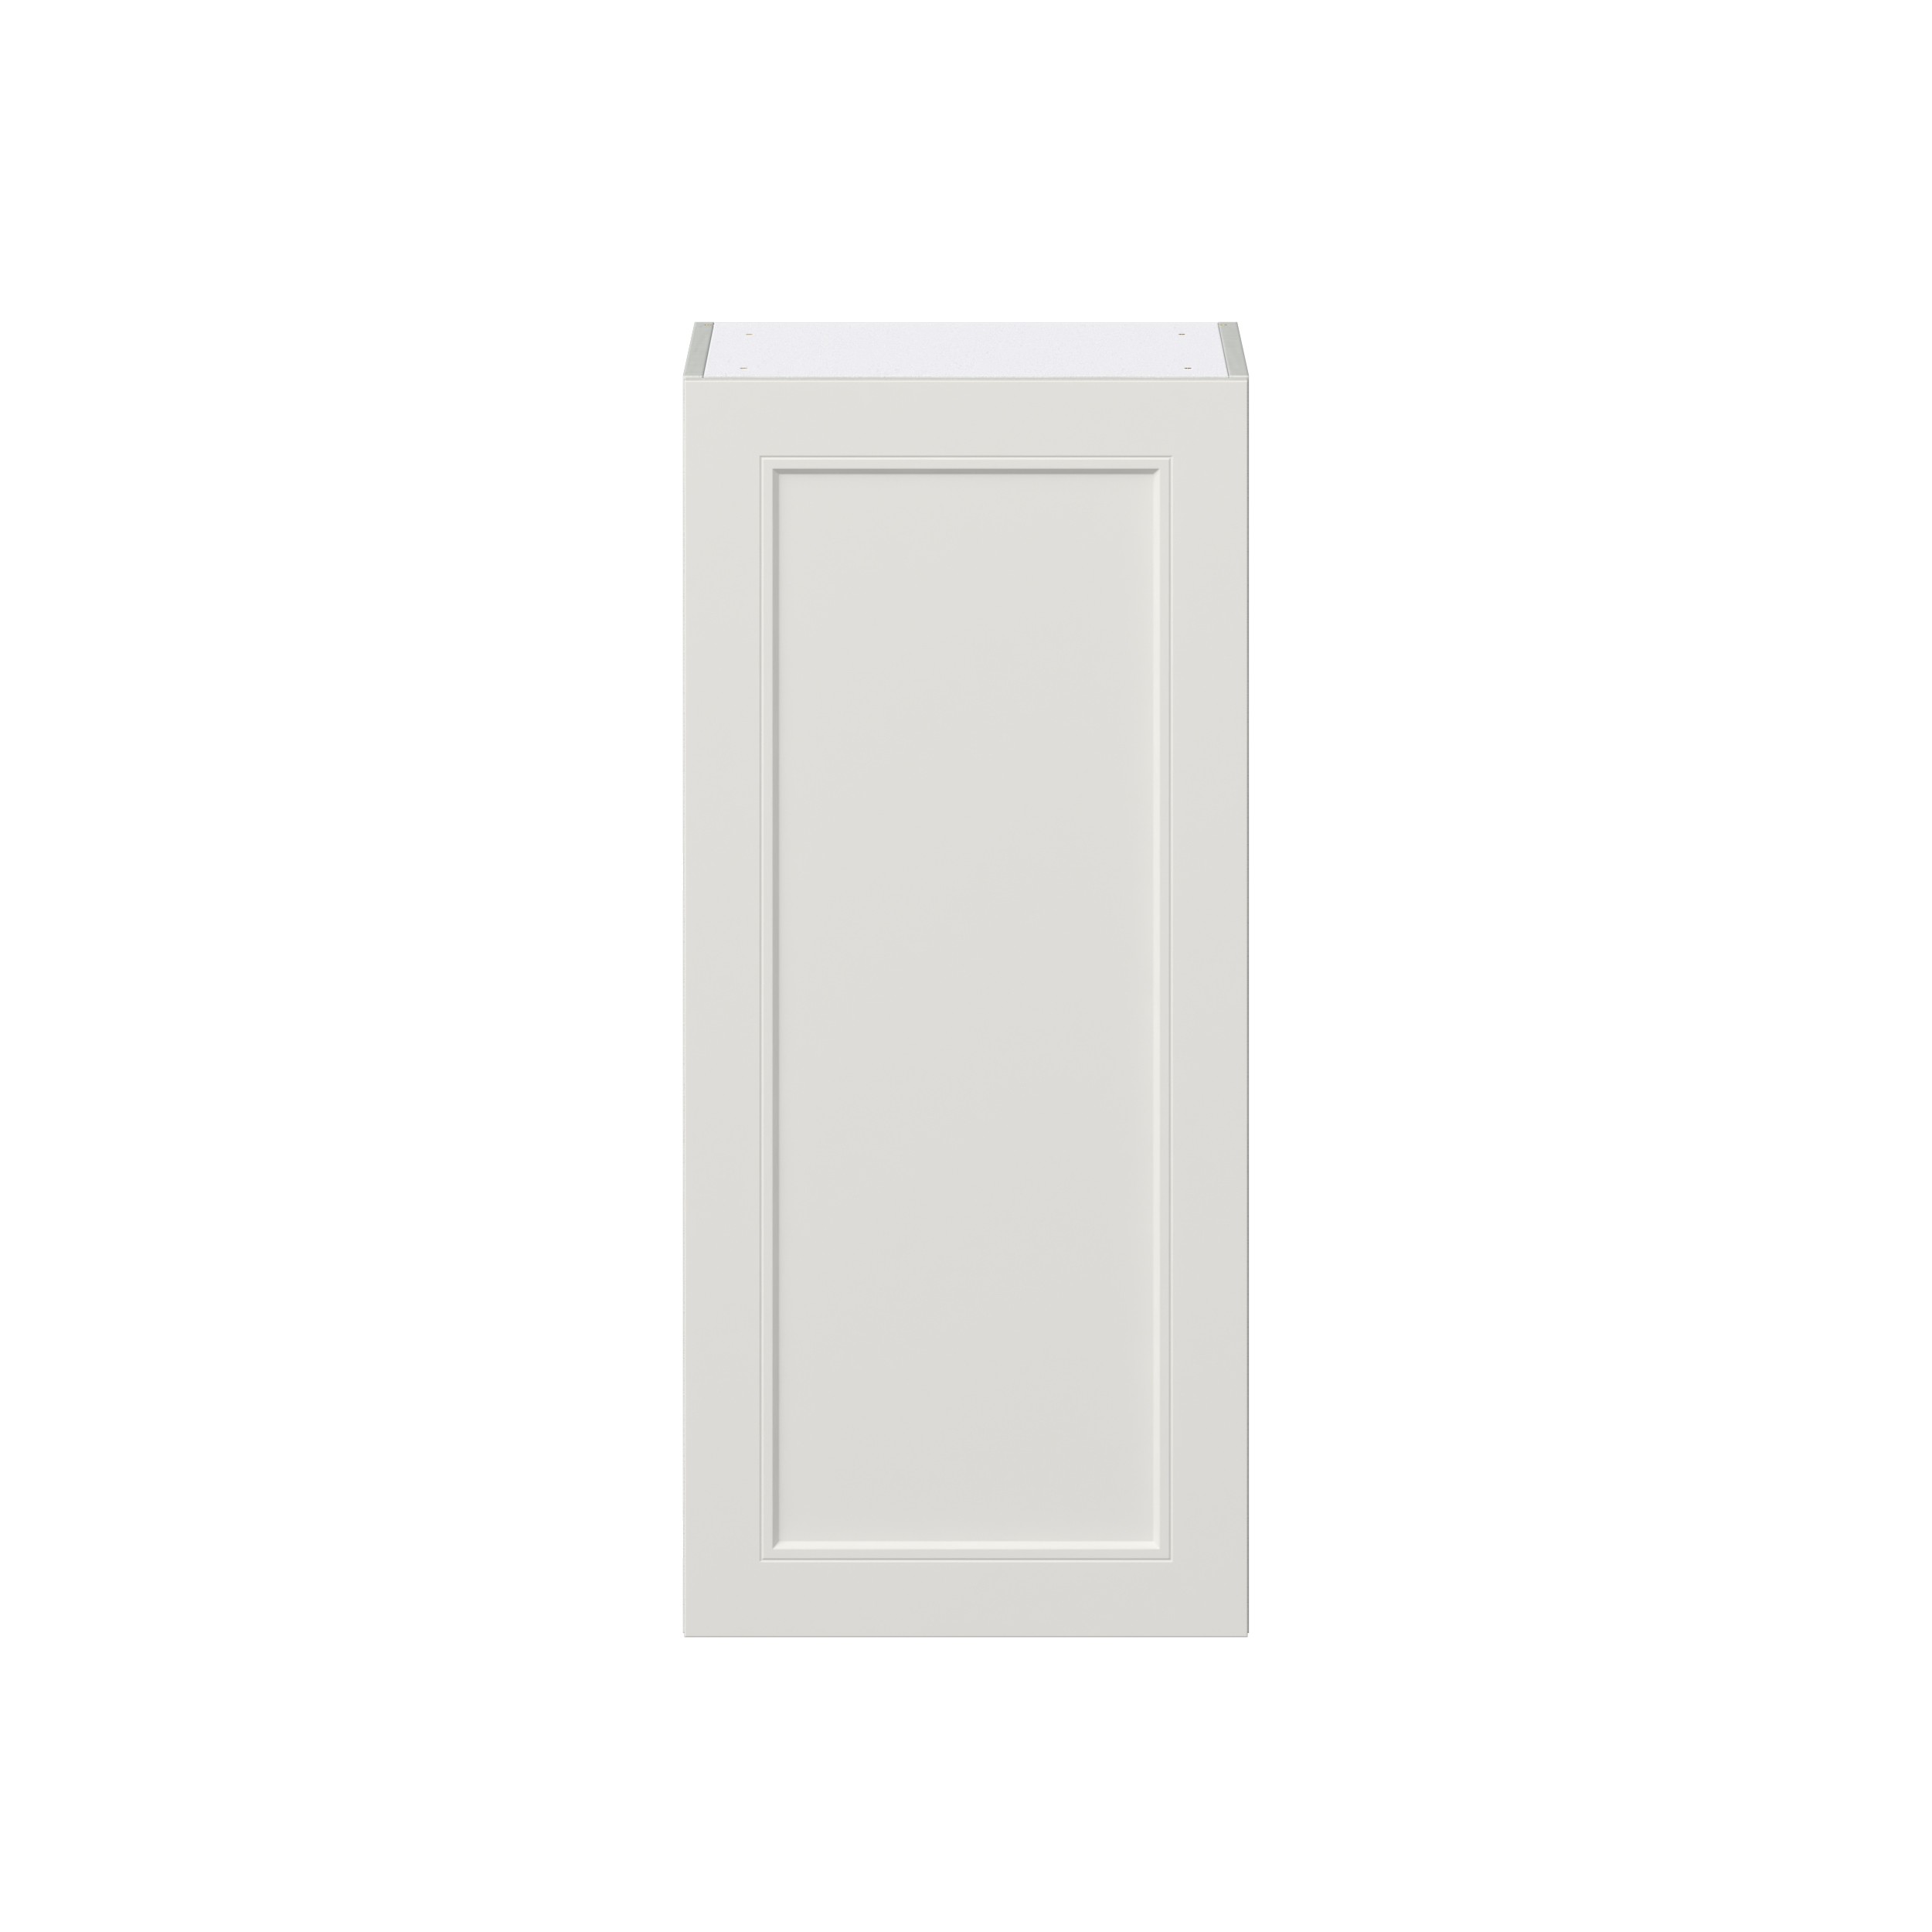 Wisteria Painted Light Gray Recessed Assembled Wall Cabinet with Full High Door (18 in. W x 40 in. H x 14 in. D)